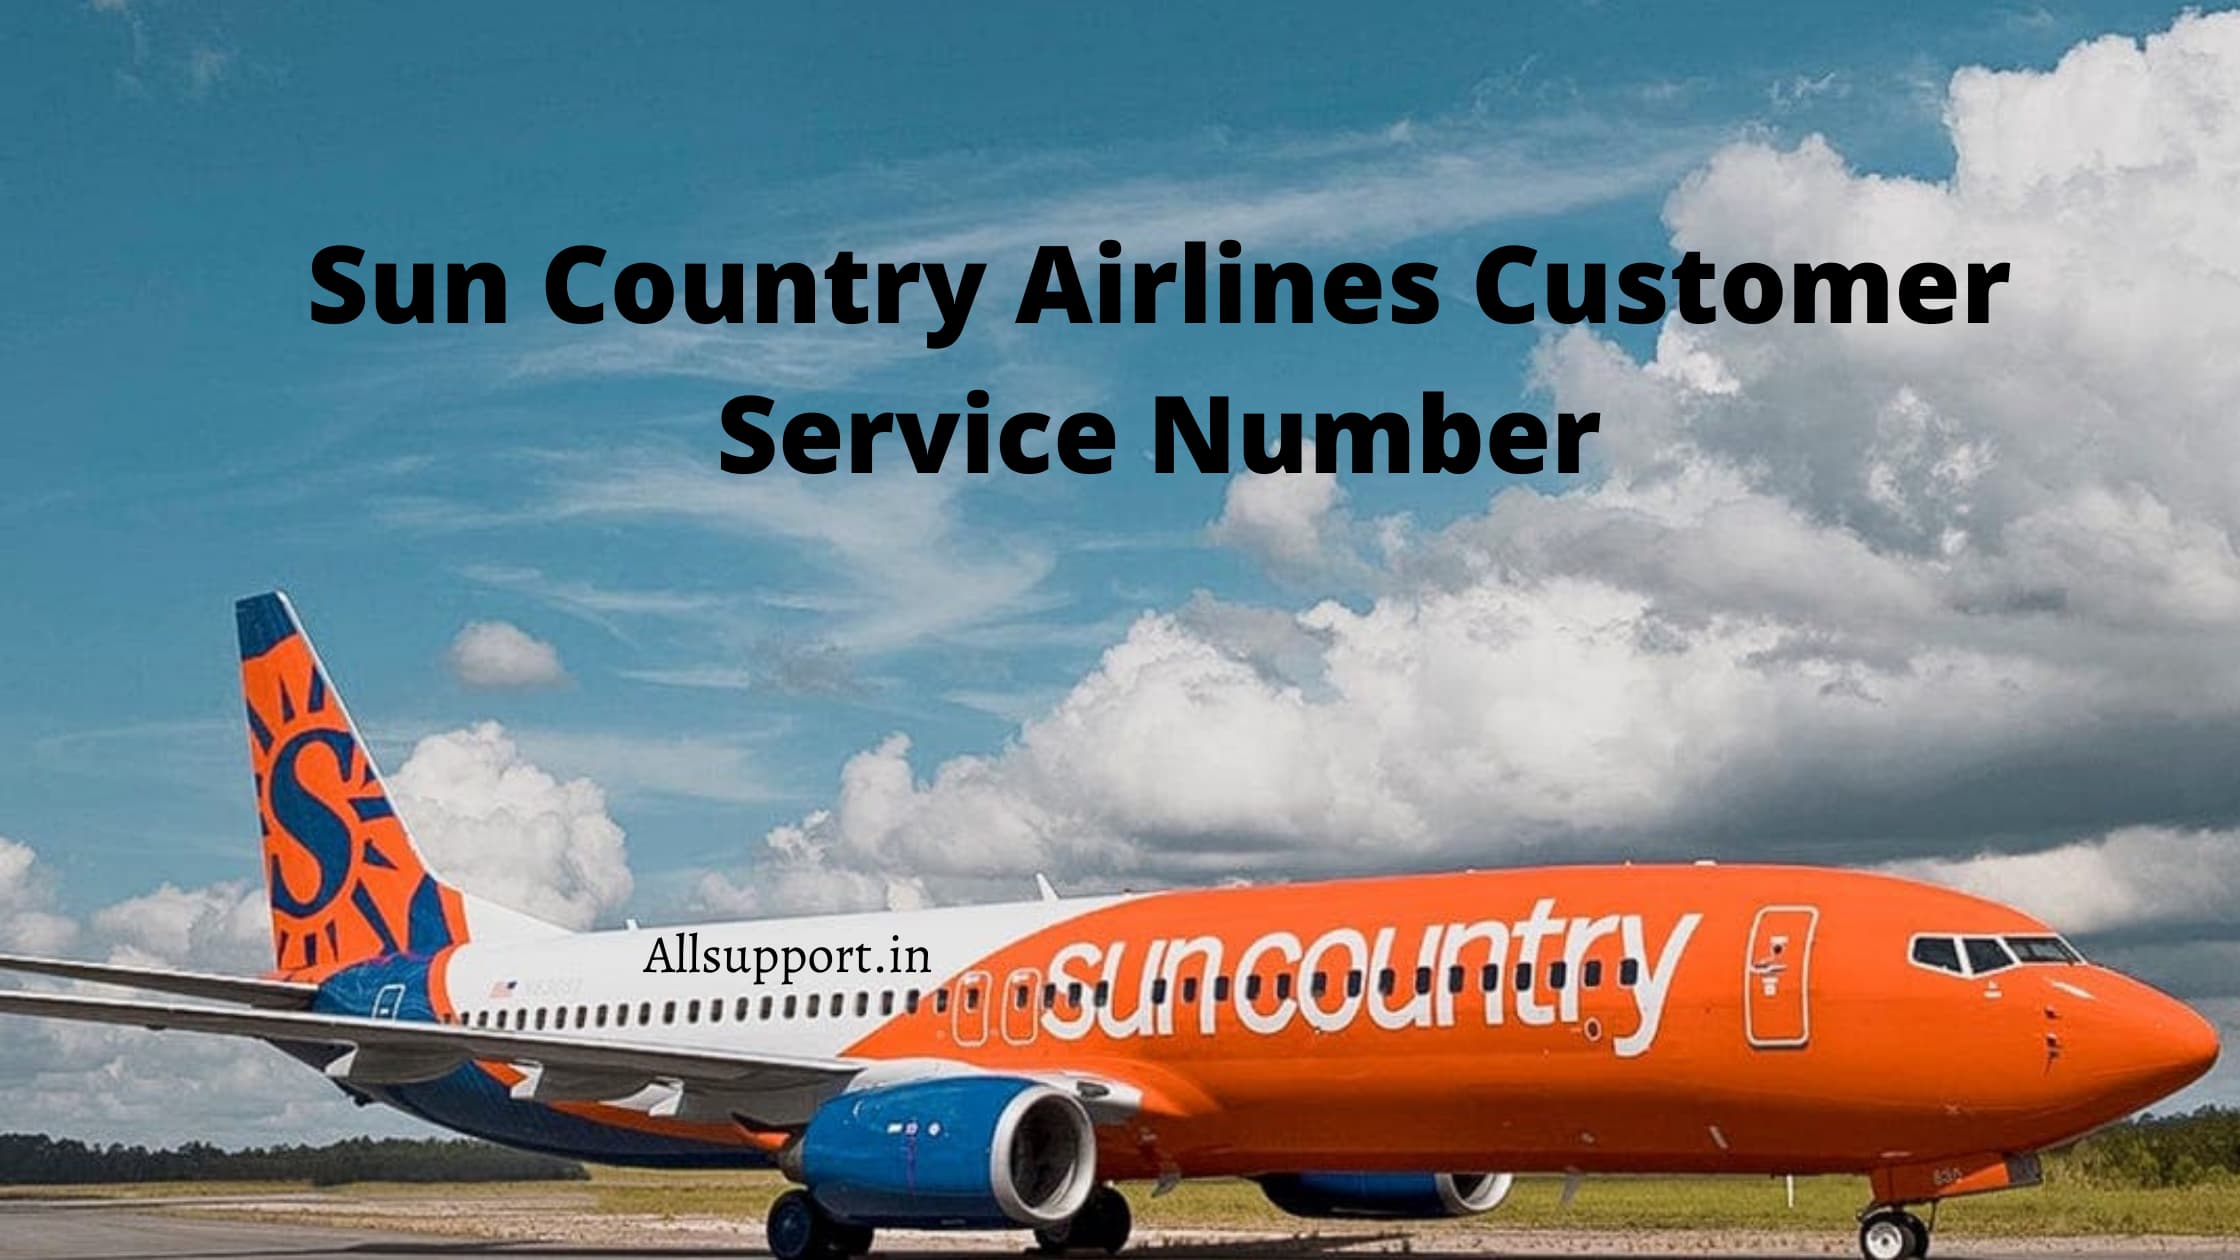 Sun Country Airlines Customer Service Number (1)